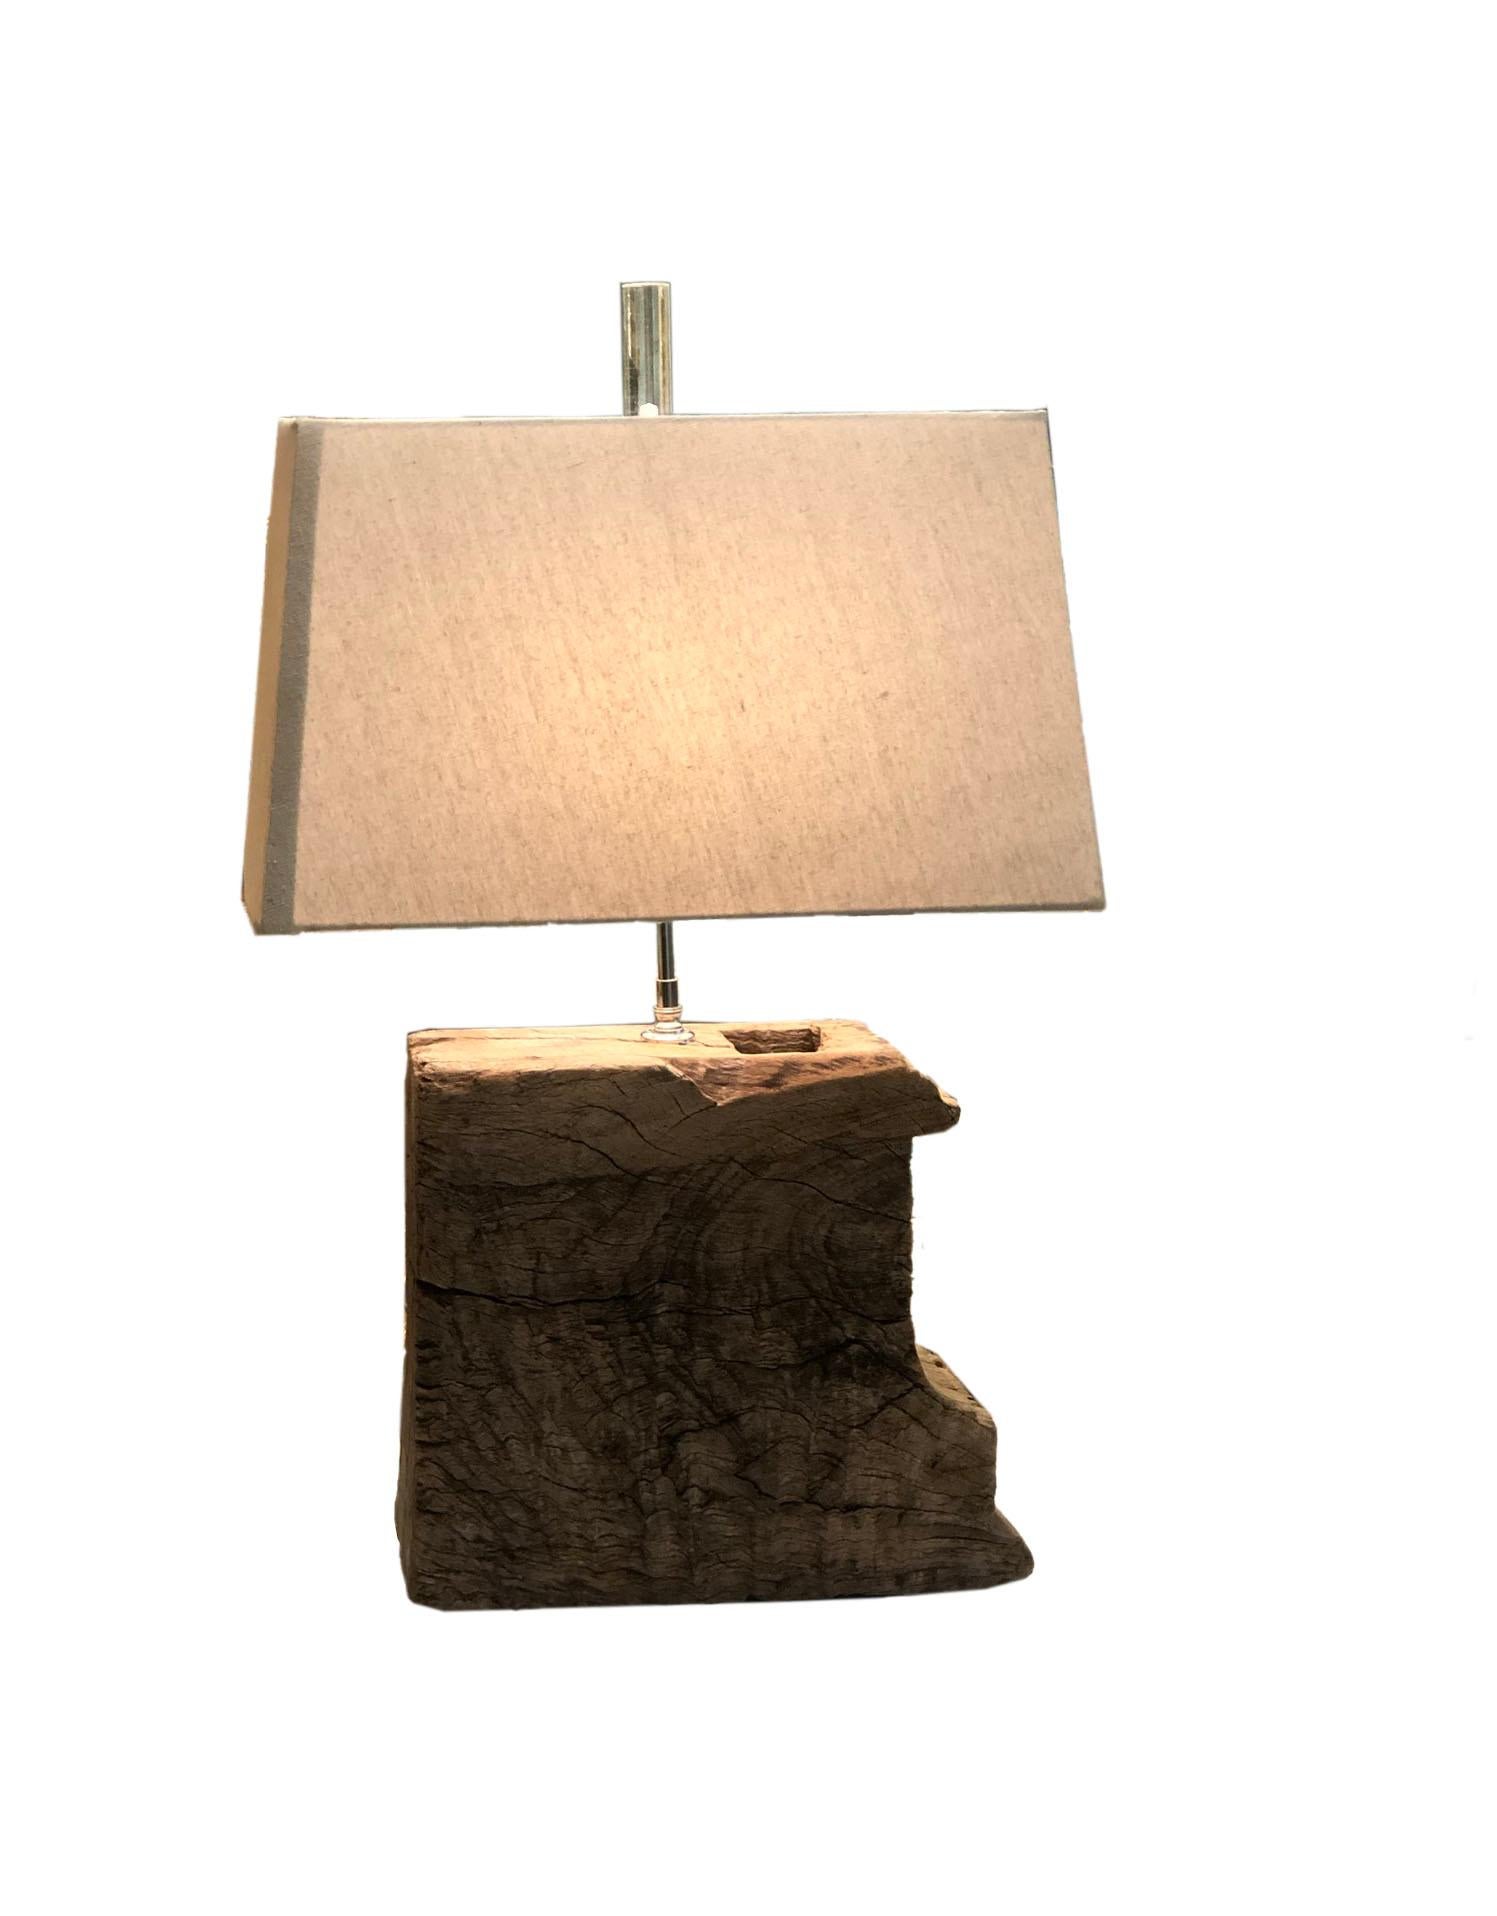 Rustic Antique Wood Fragment Lamp with Shade